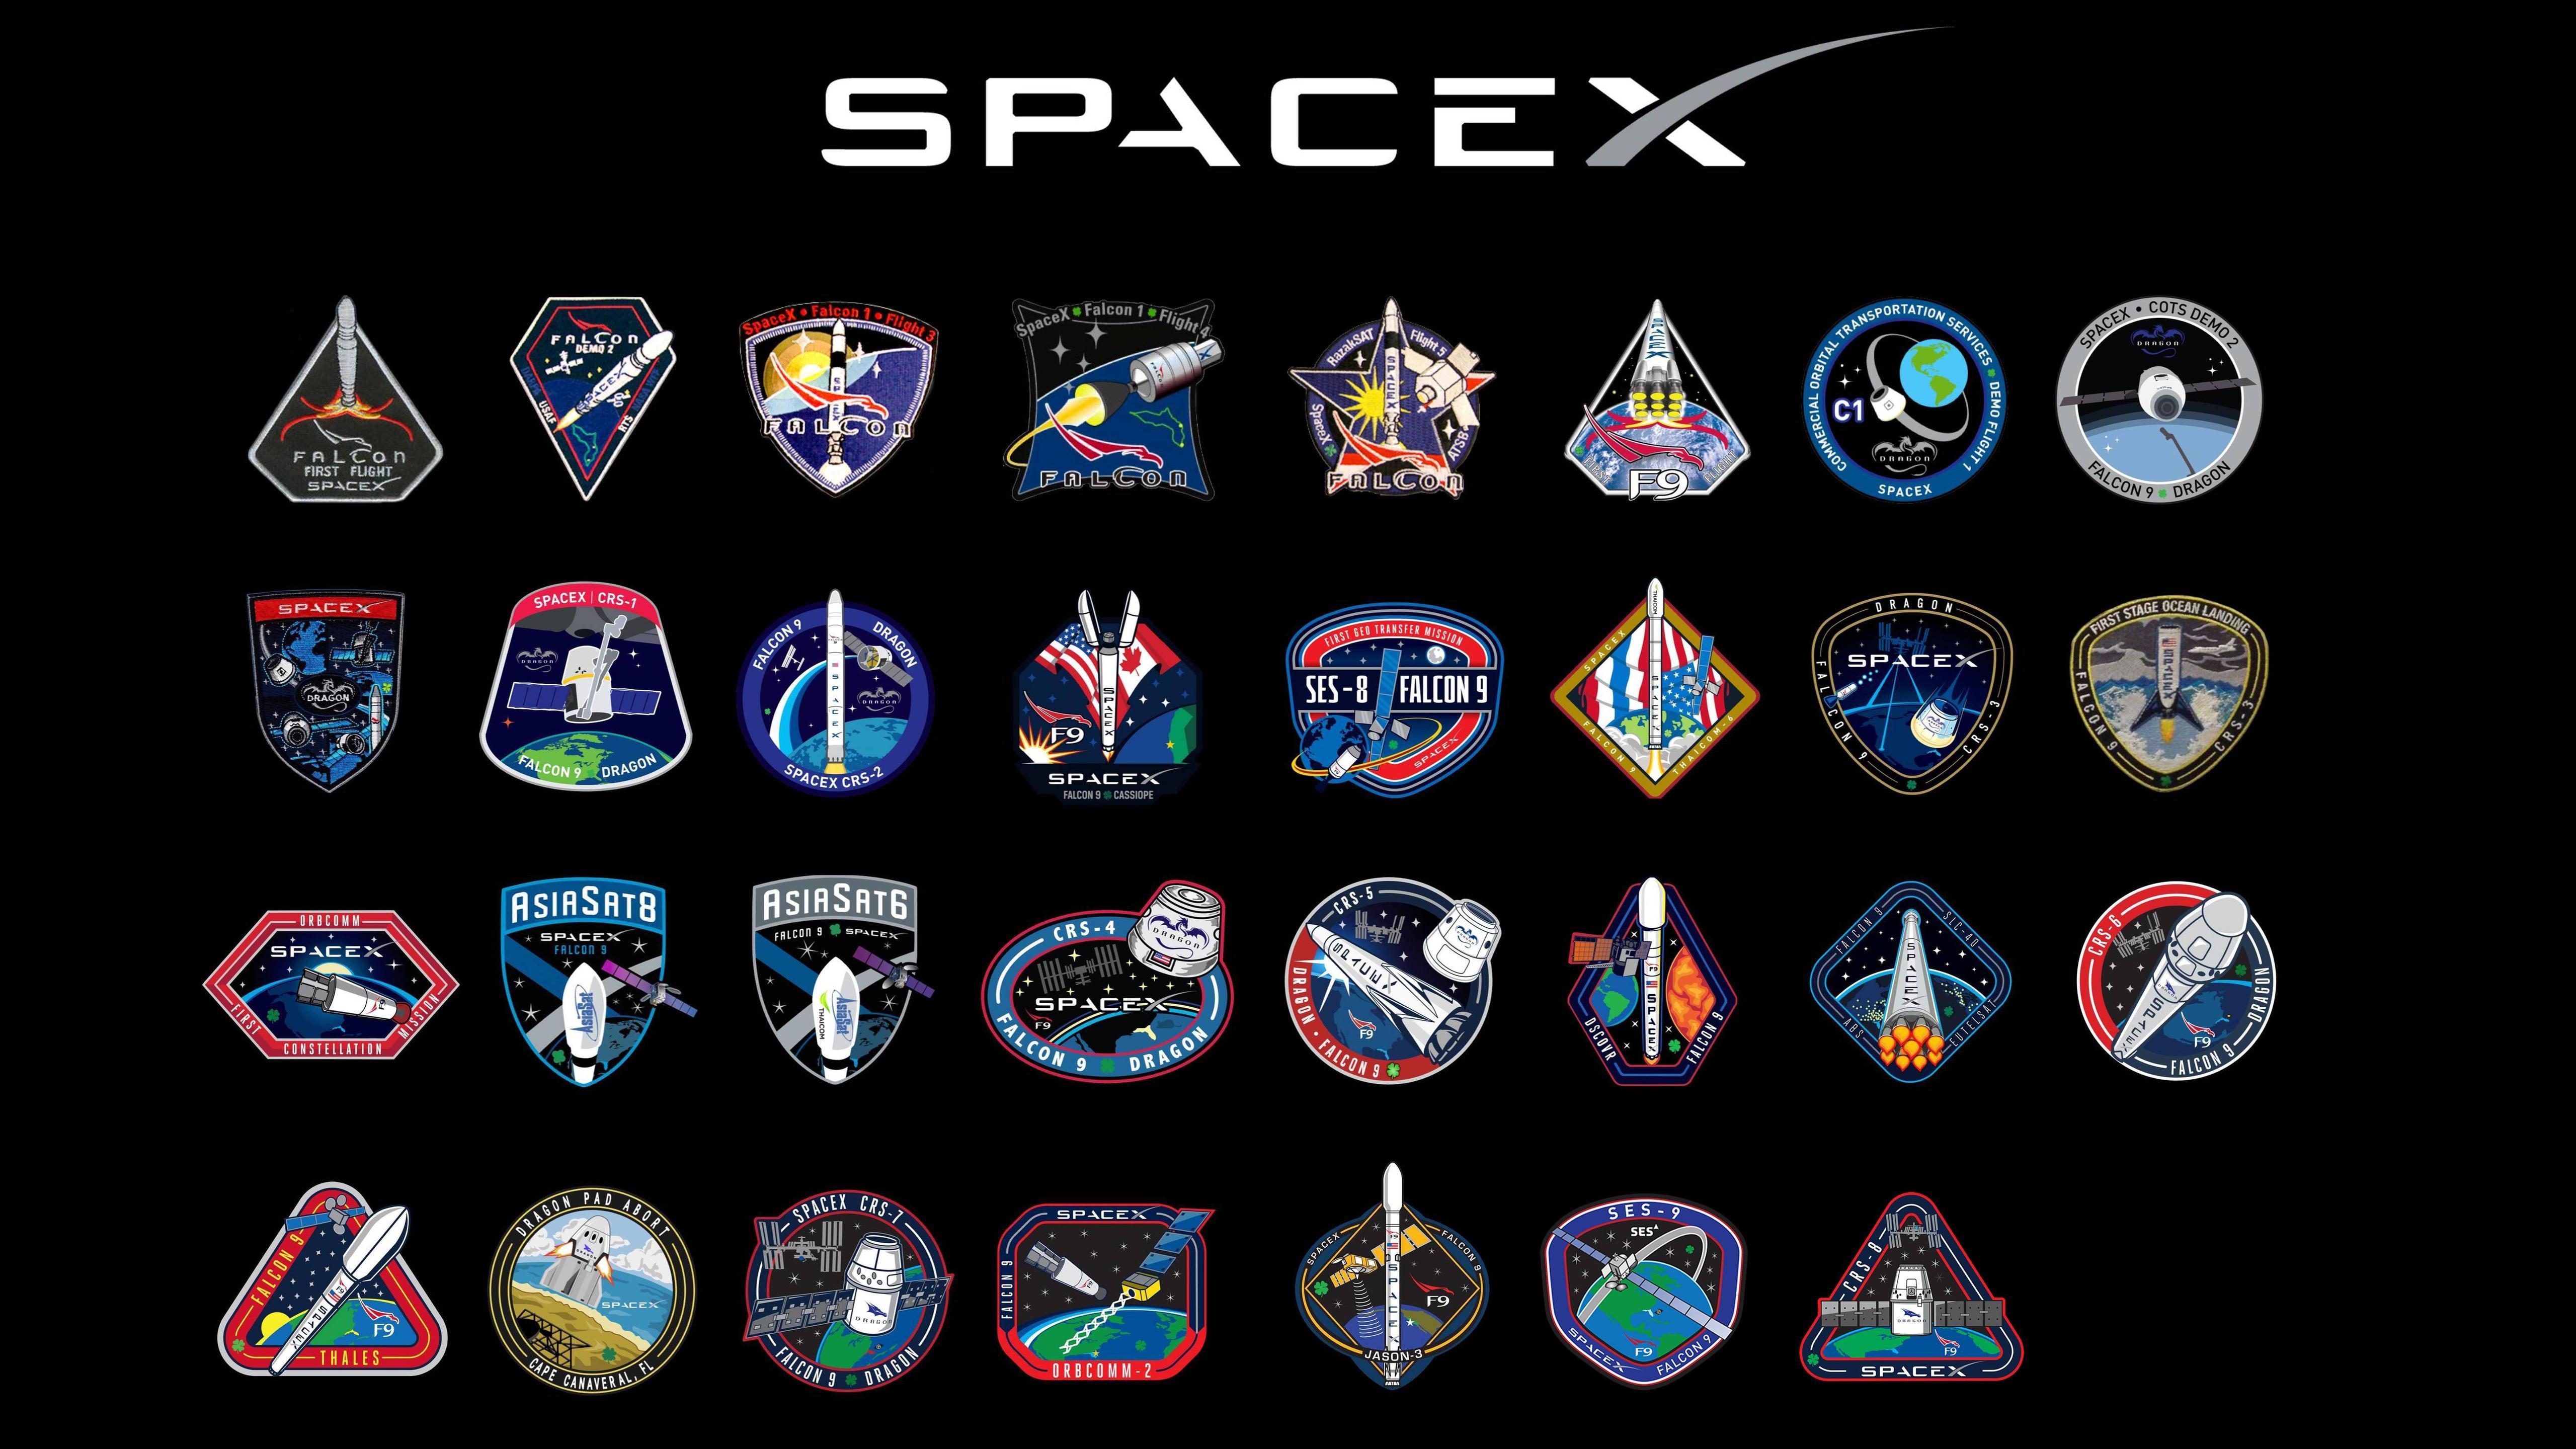 SpaceX Falcon 9 Logo - SpaceX Mission Patch Wallpaper (16:9) : spacex